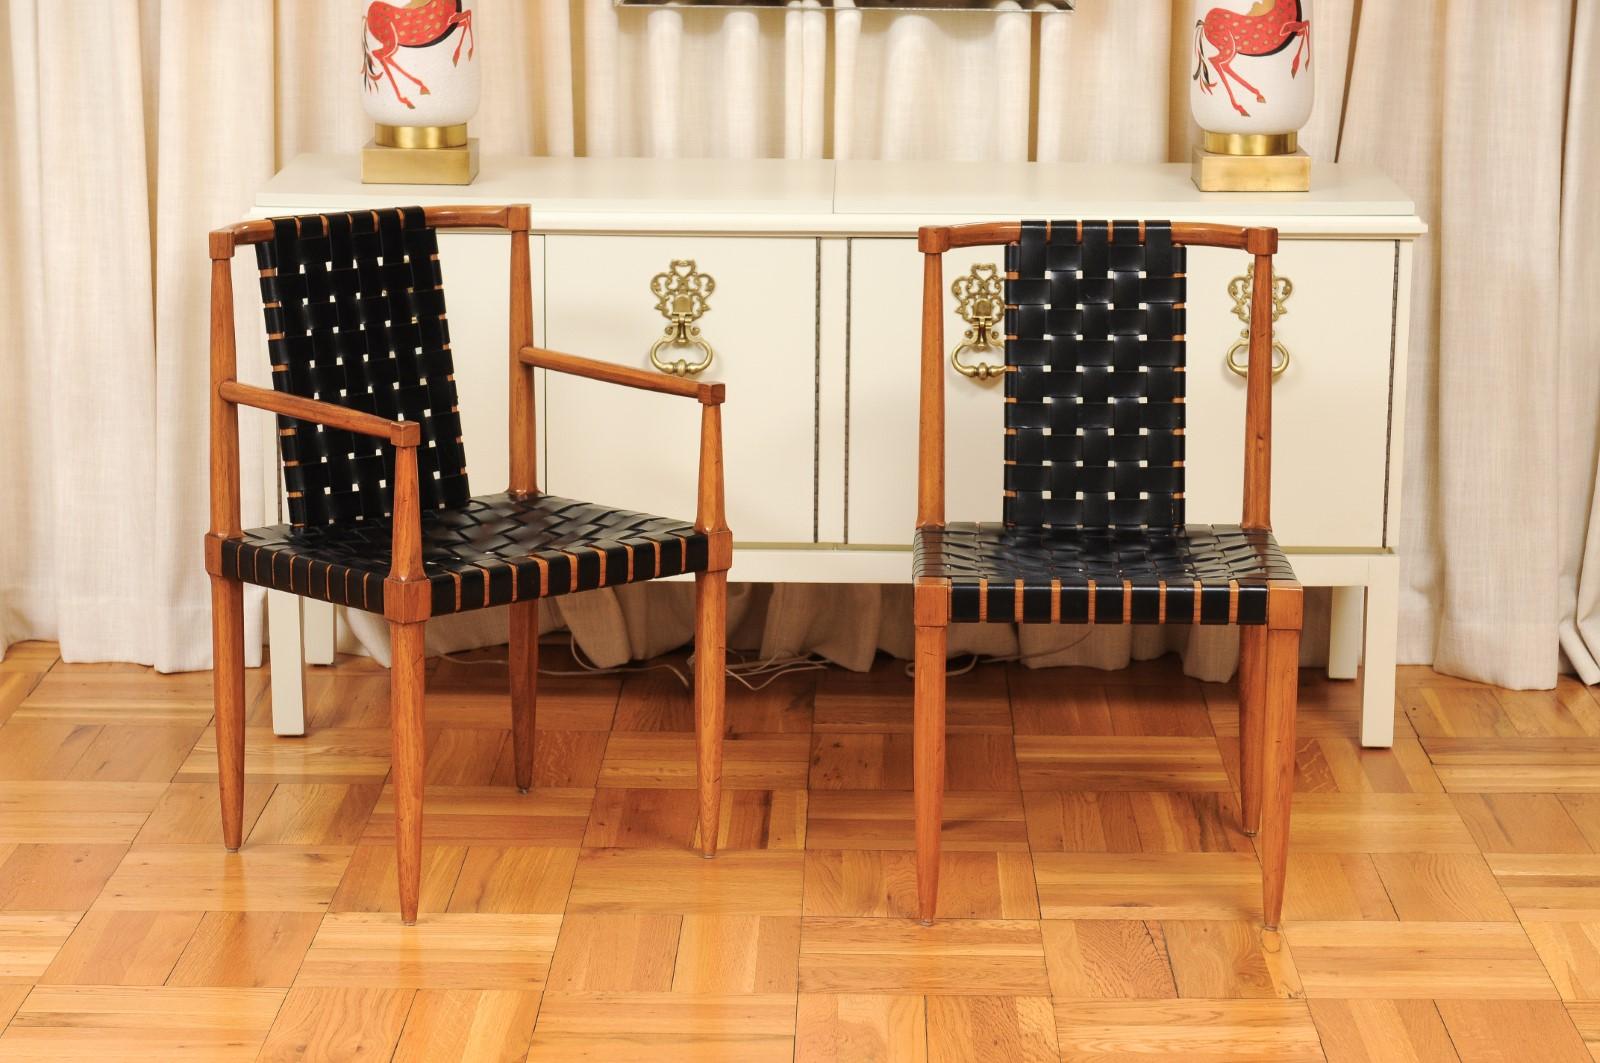 These magnificent dining chairs are shipped as professionally photographed and described in the listing narrative: Meticulously professionally restored and installation ready. This large set of rare examples is Unique on the World market.

An